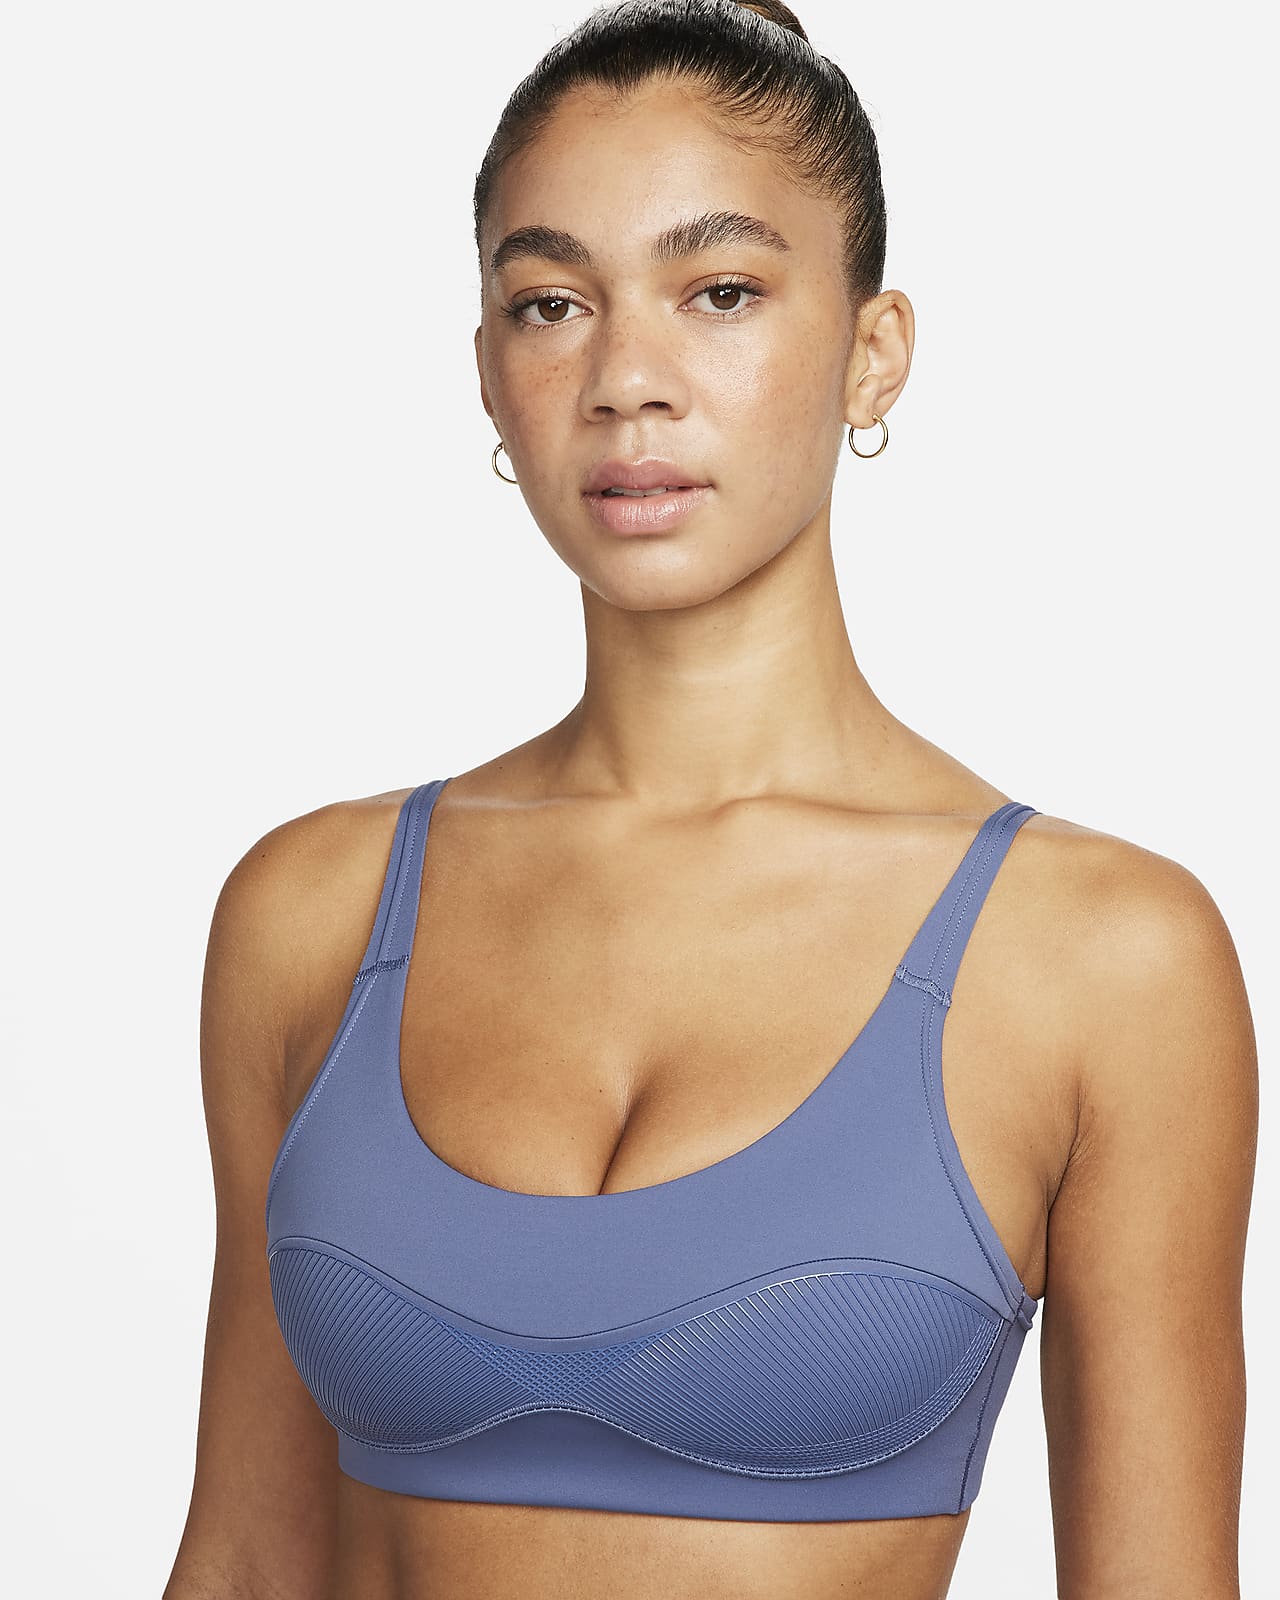 Nike Yoga Indy light support essentials sports bra in pink